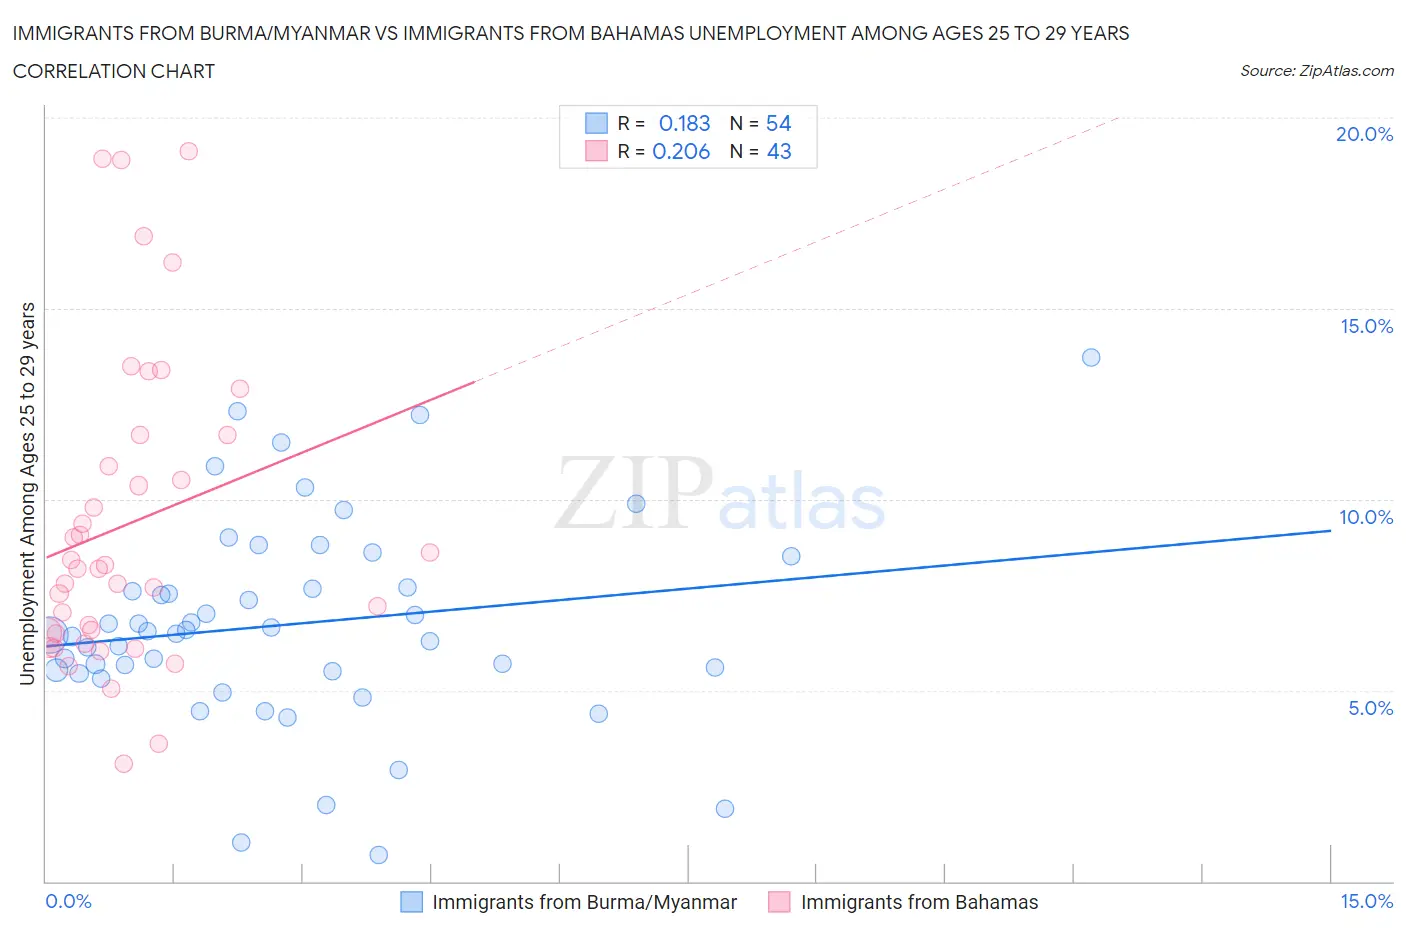 Immigrants from Burma/Myanmar vs Immigrants from Bahamas Unemployment Among Ages 25 to 29 years